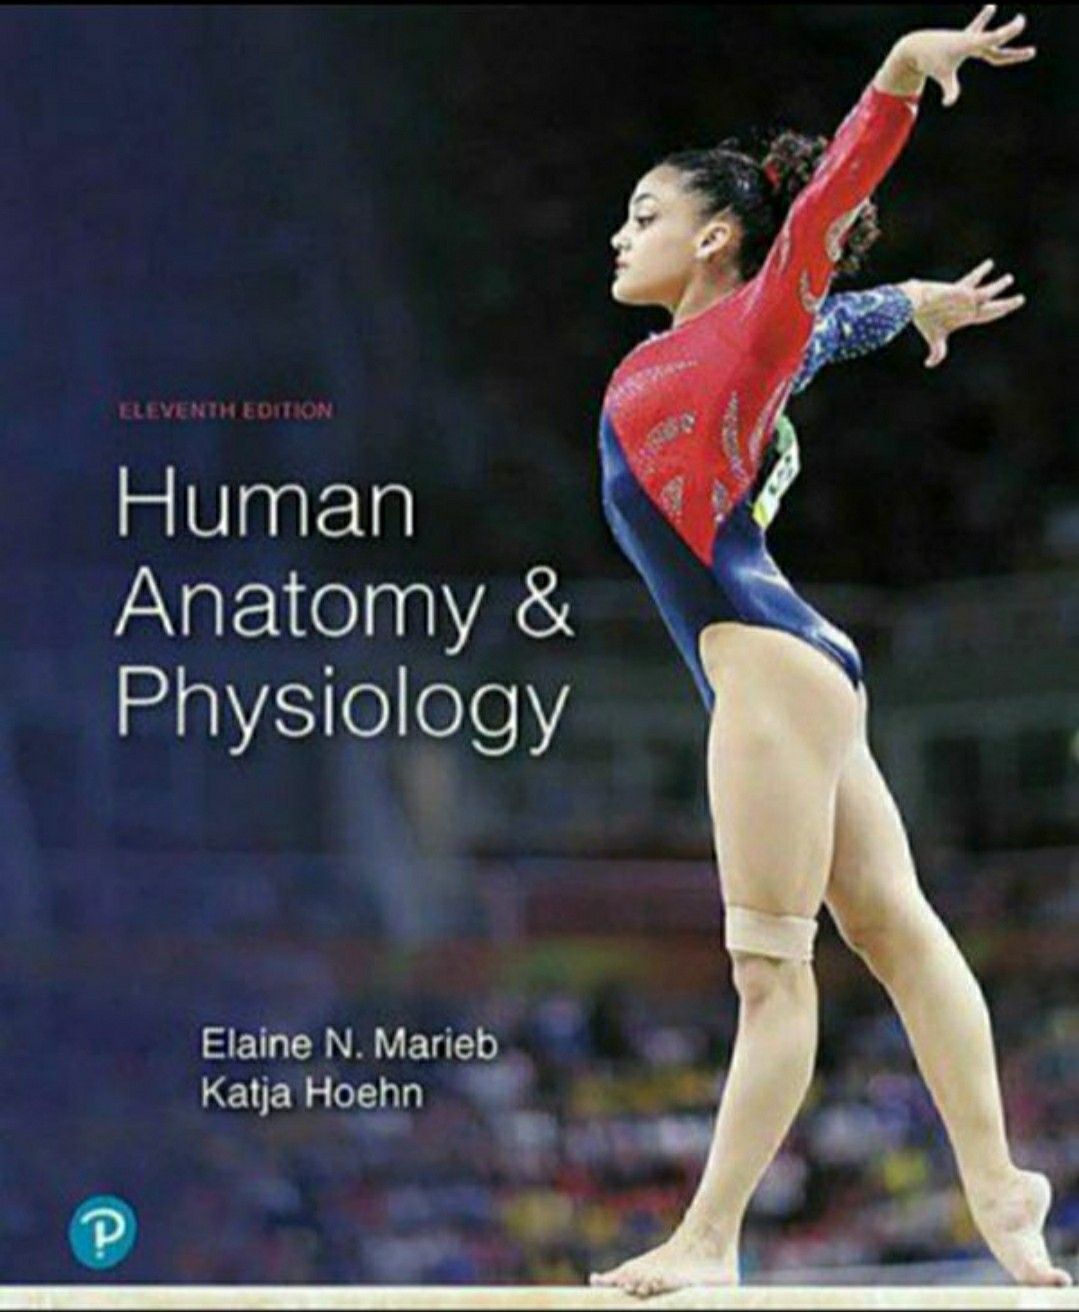 Human Anatomy and Physiology 11th ed by Elaine N. Marieb and Katja N. Hoeh 9780134580999 eBook PDF Free instant Delivery